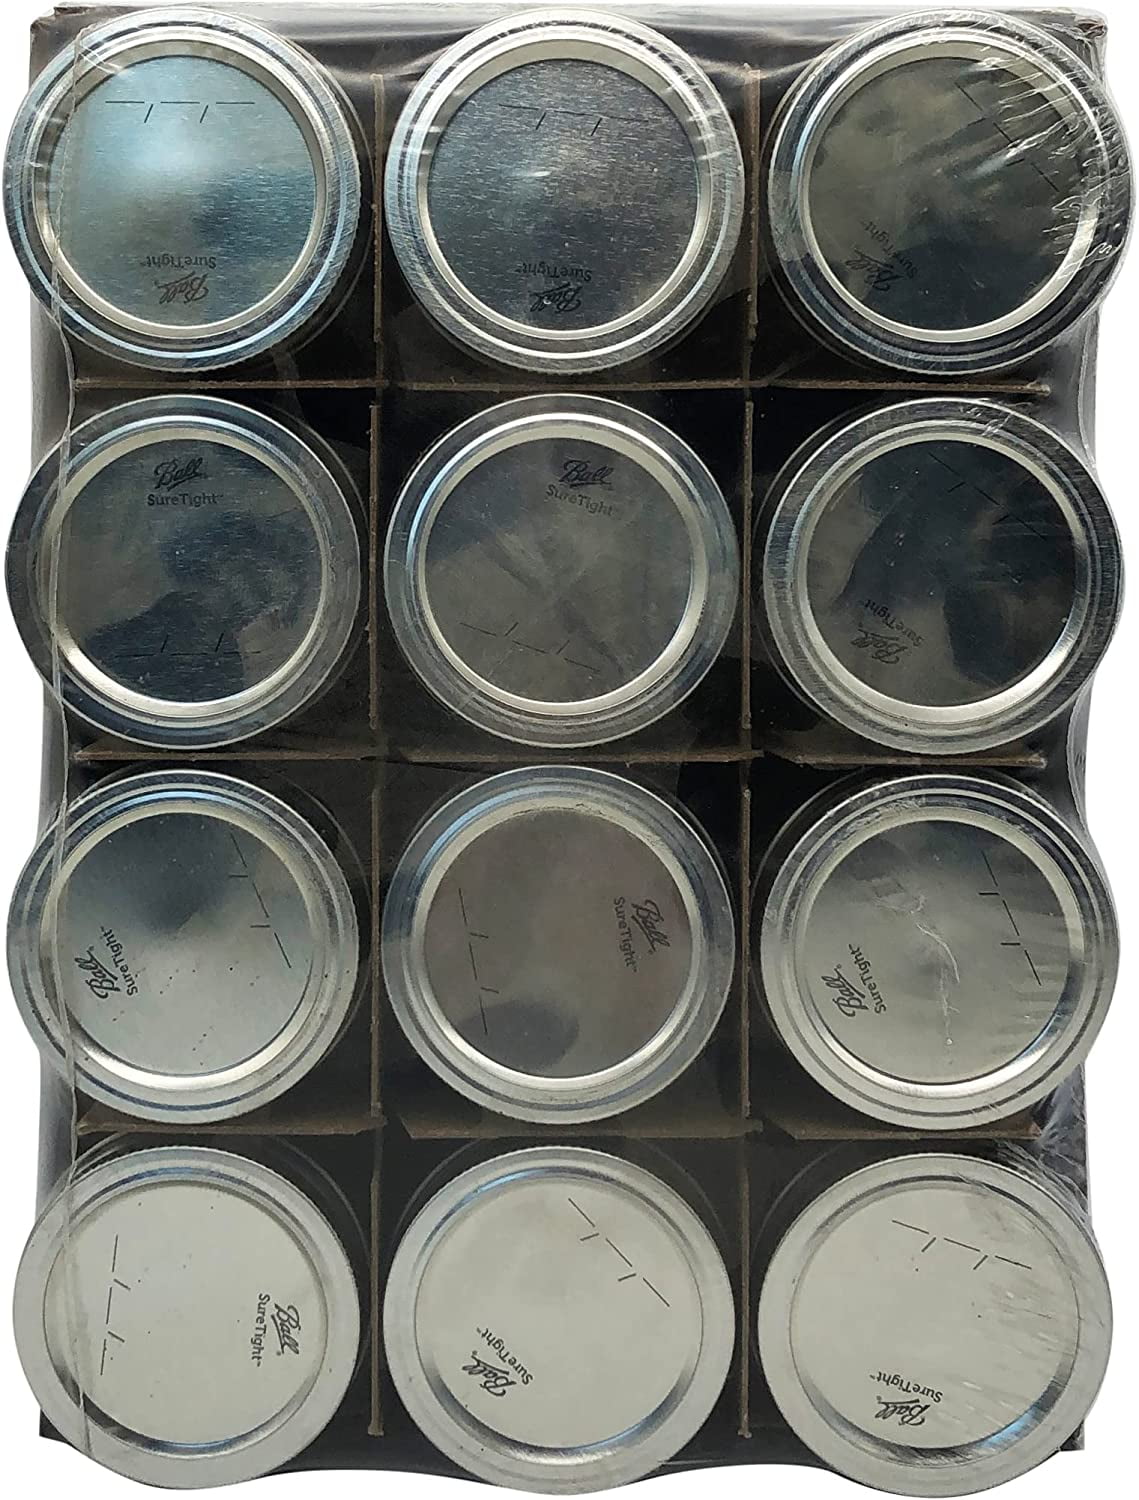 8 oz Quilted Jelly Jars w/ Lids - 12 Pk by Ball at Fleet Farm